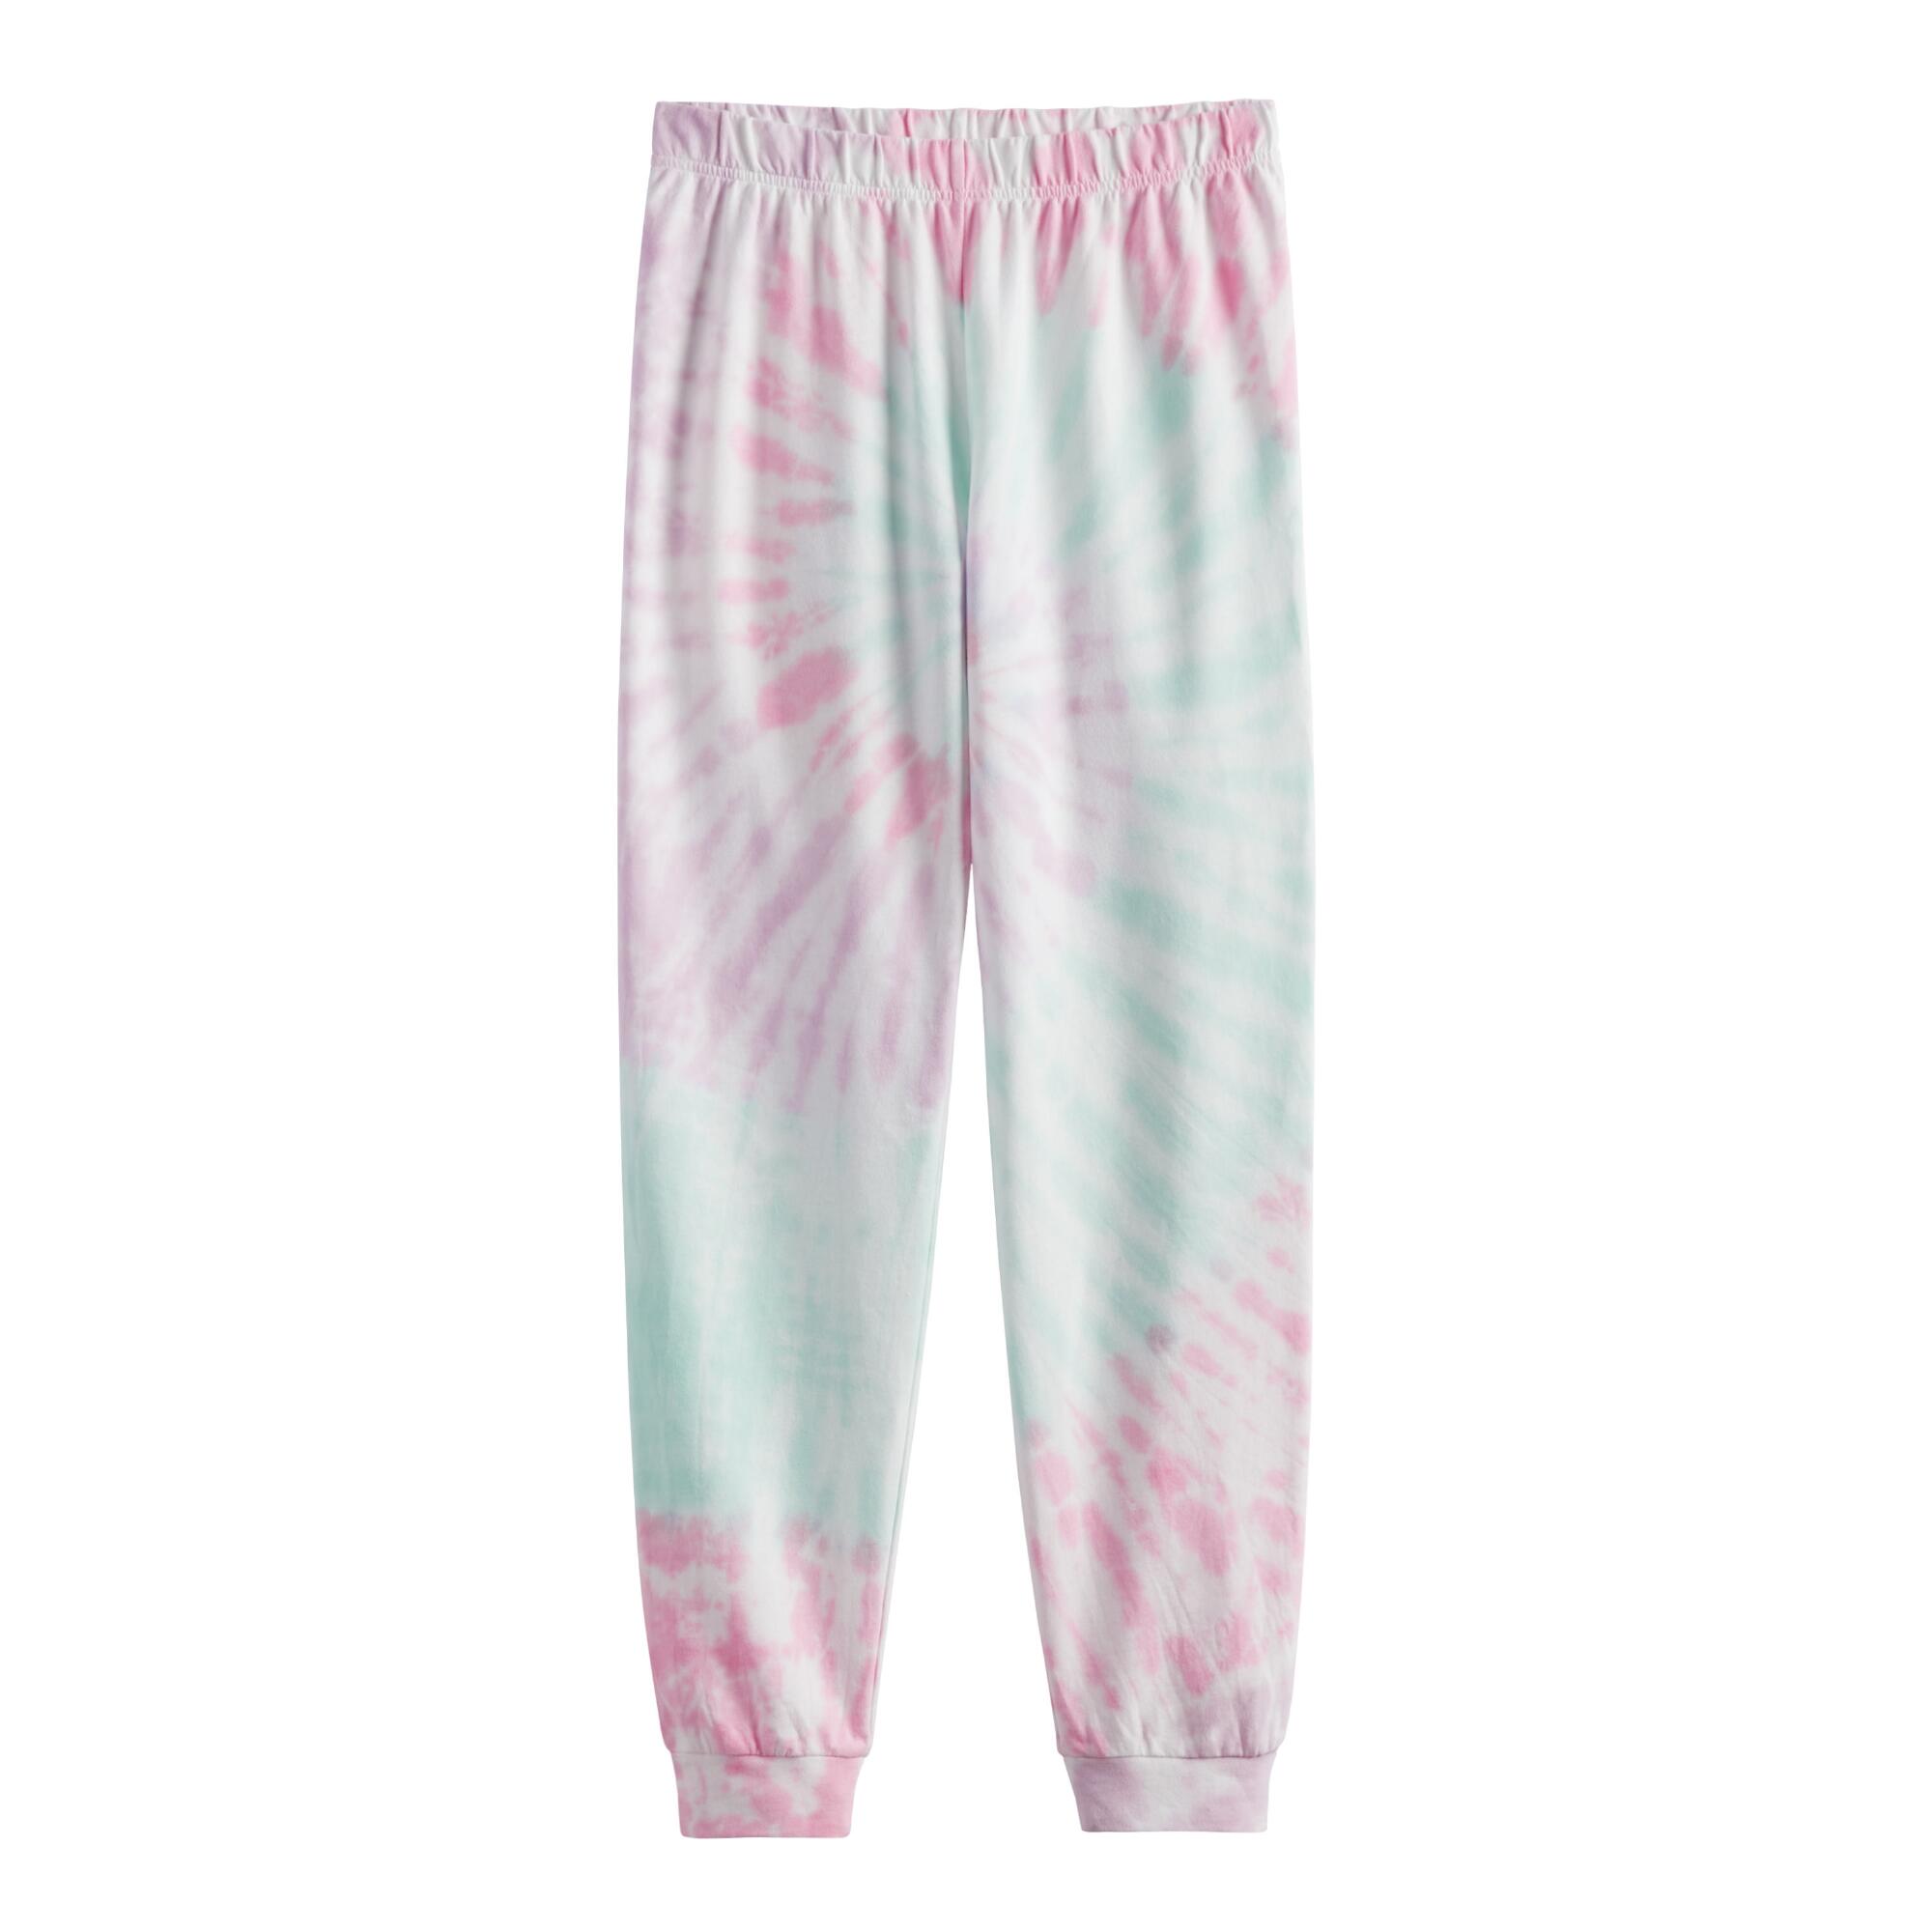 Multicolor Tie Dye Lounge Pant - Small by World Market